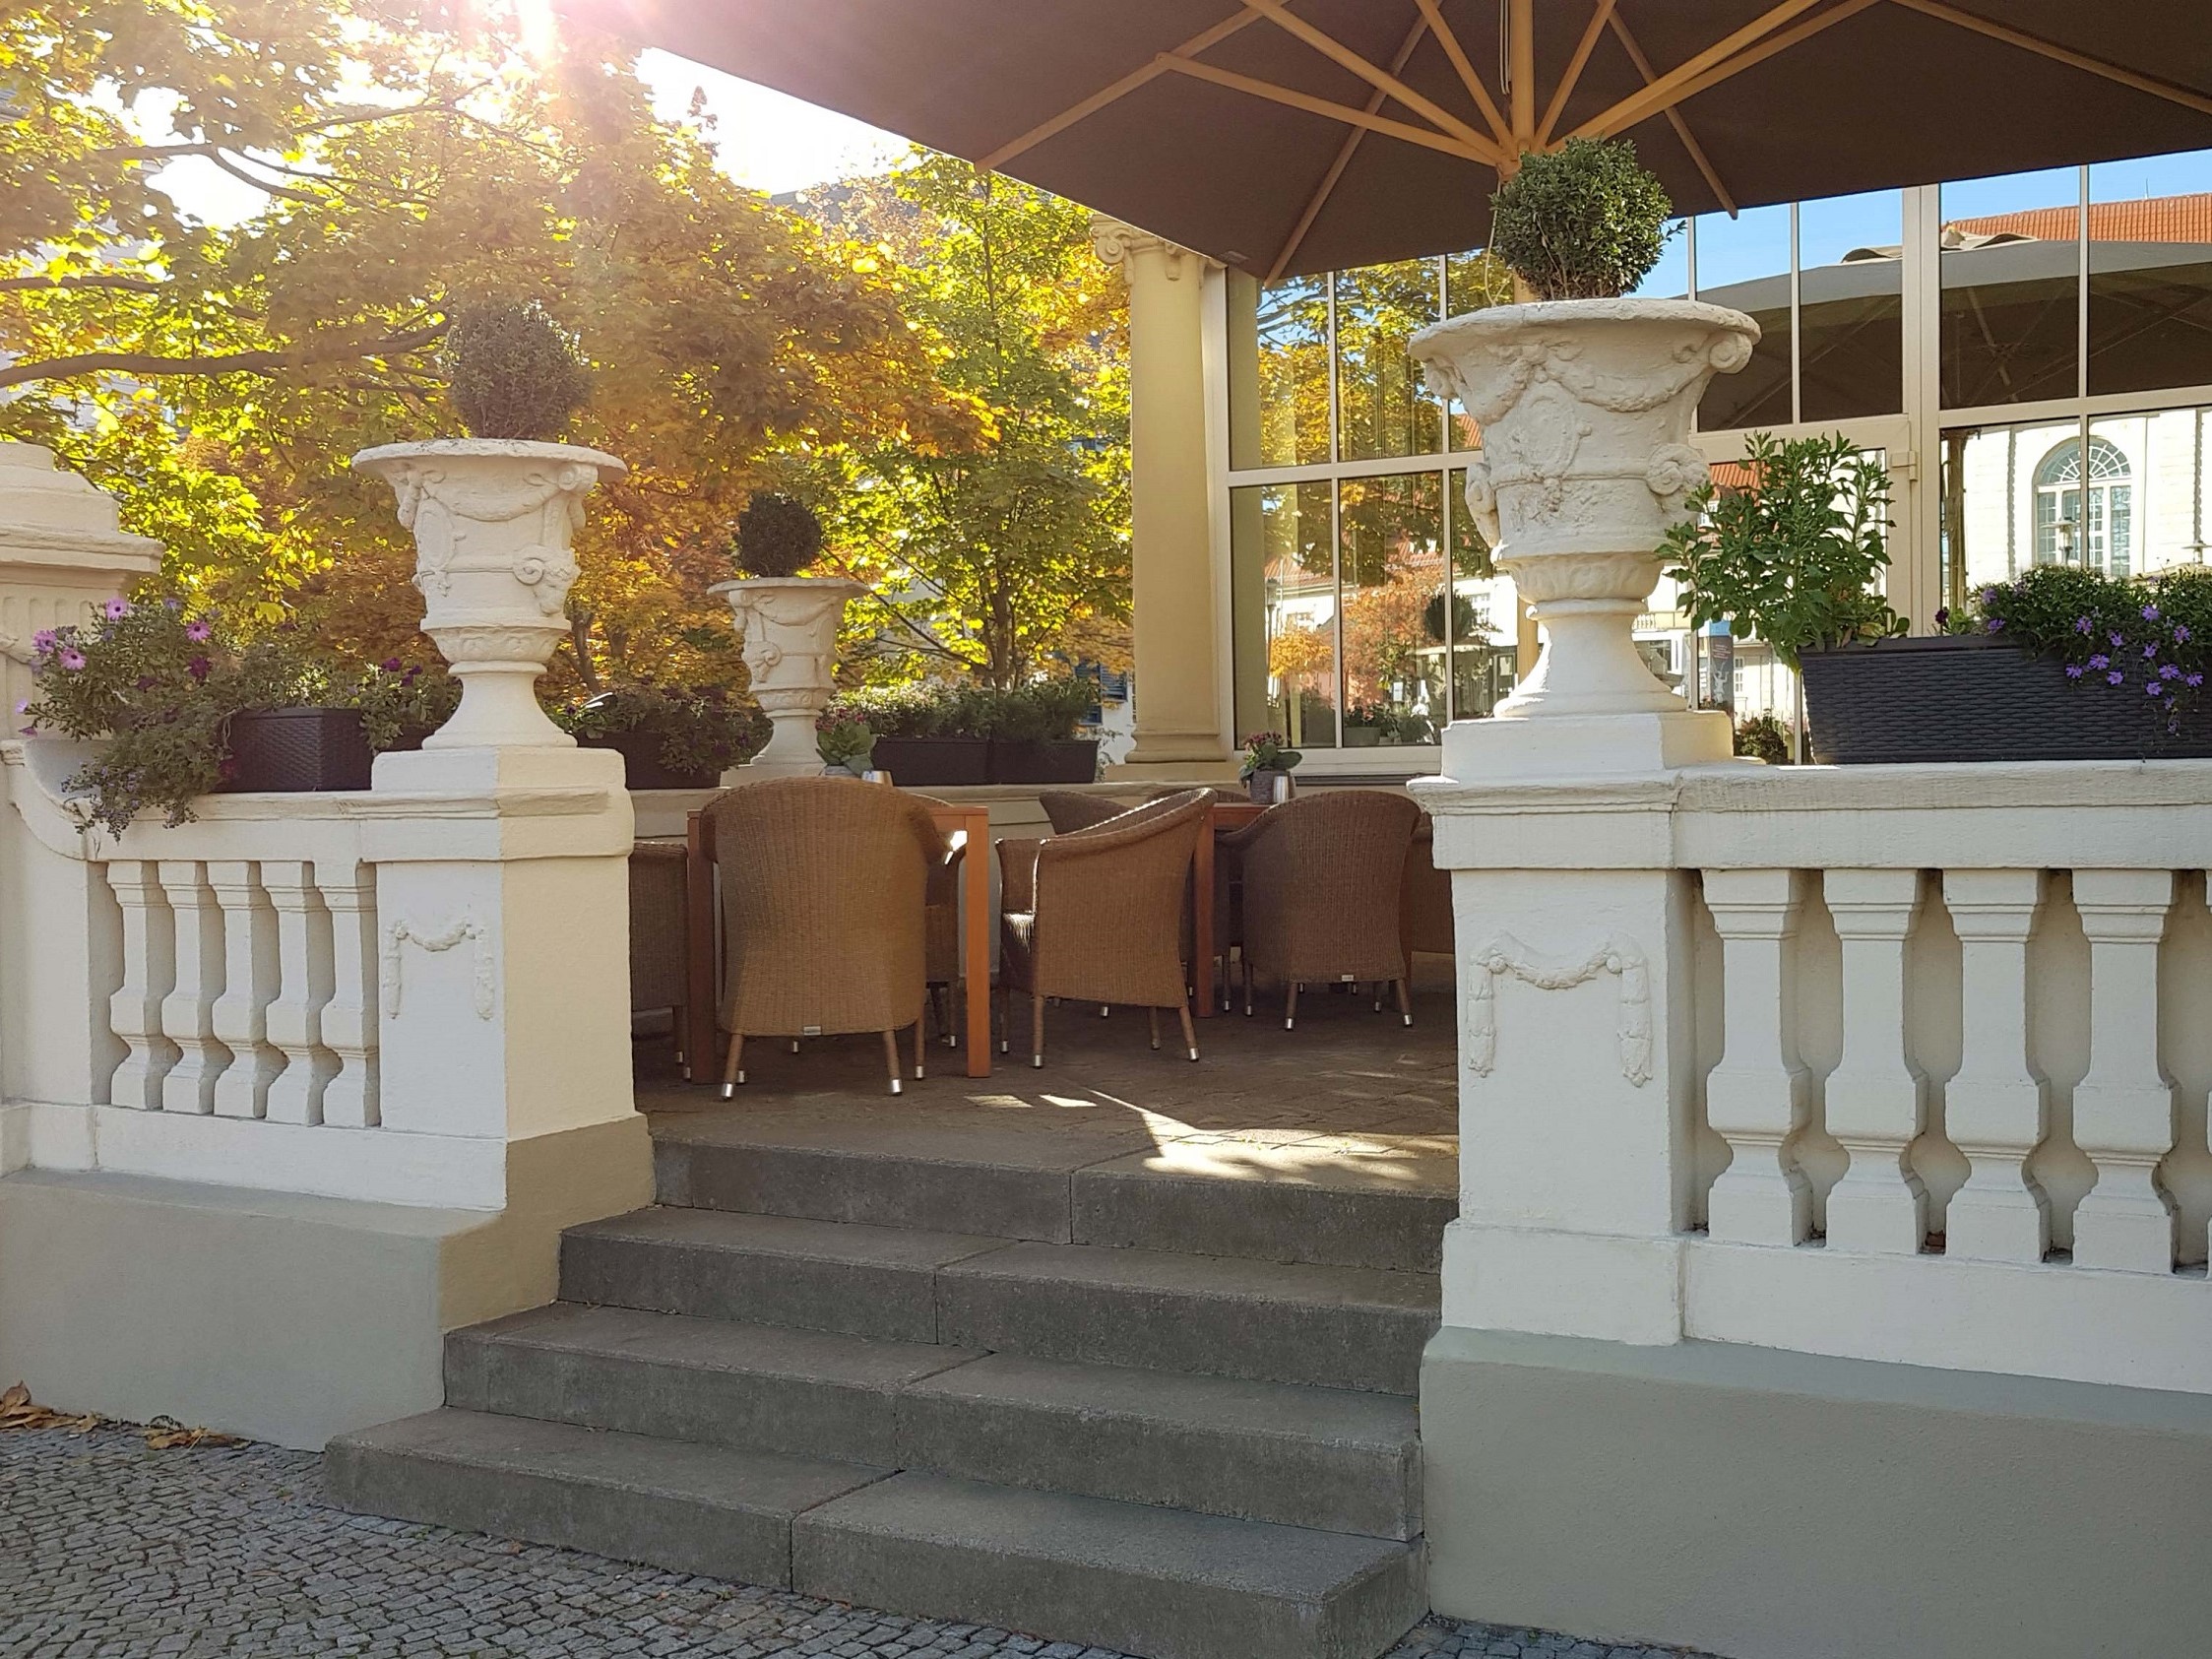 The terrace of the hotel with comfortable wicker armchairs and colorful flower boxes.